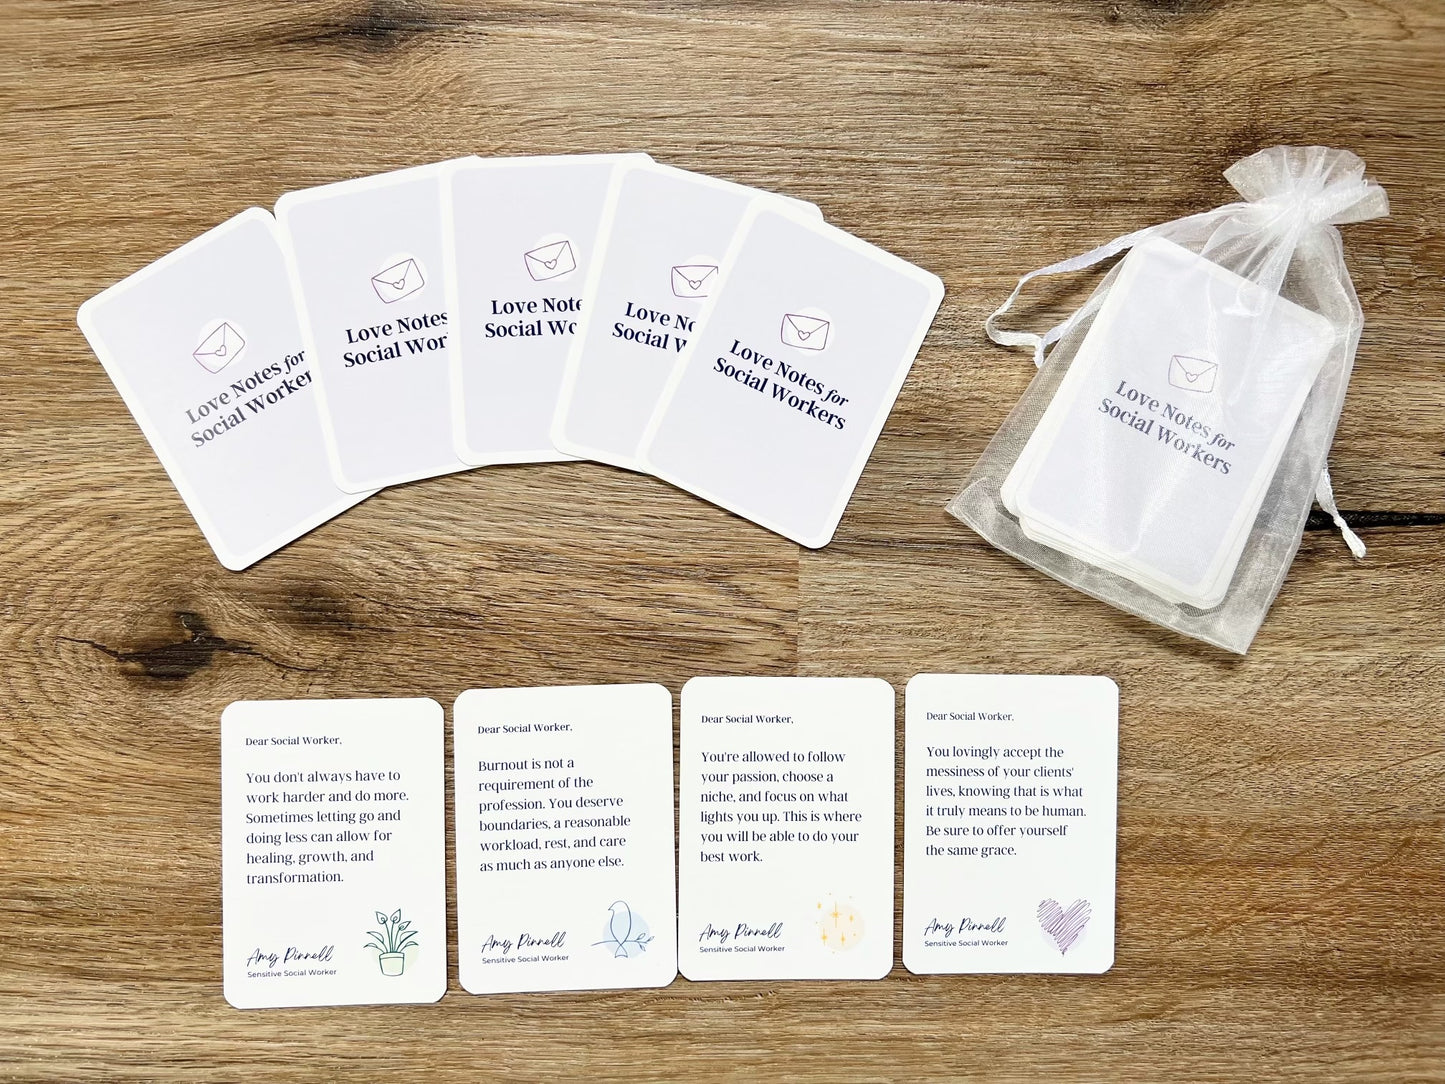 The card deck is displayed so that you can see the back of 5 of the cards which are purple and say "Love Notes for Social Workers" on them. 4 cards are laid out so you can see the front of the cards. They include messages such as "Dear Social Worker, You don't always have to work harder and do more. Sometimes letting go and doing less can allow for healing, growth, and transformation". The rest of the deck in shown inside a white organza bag.